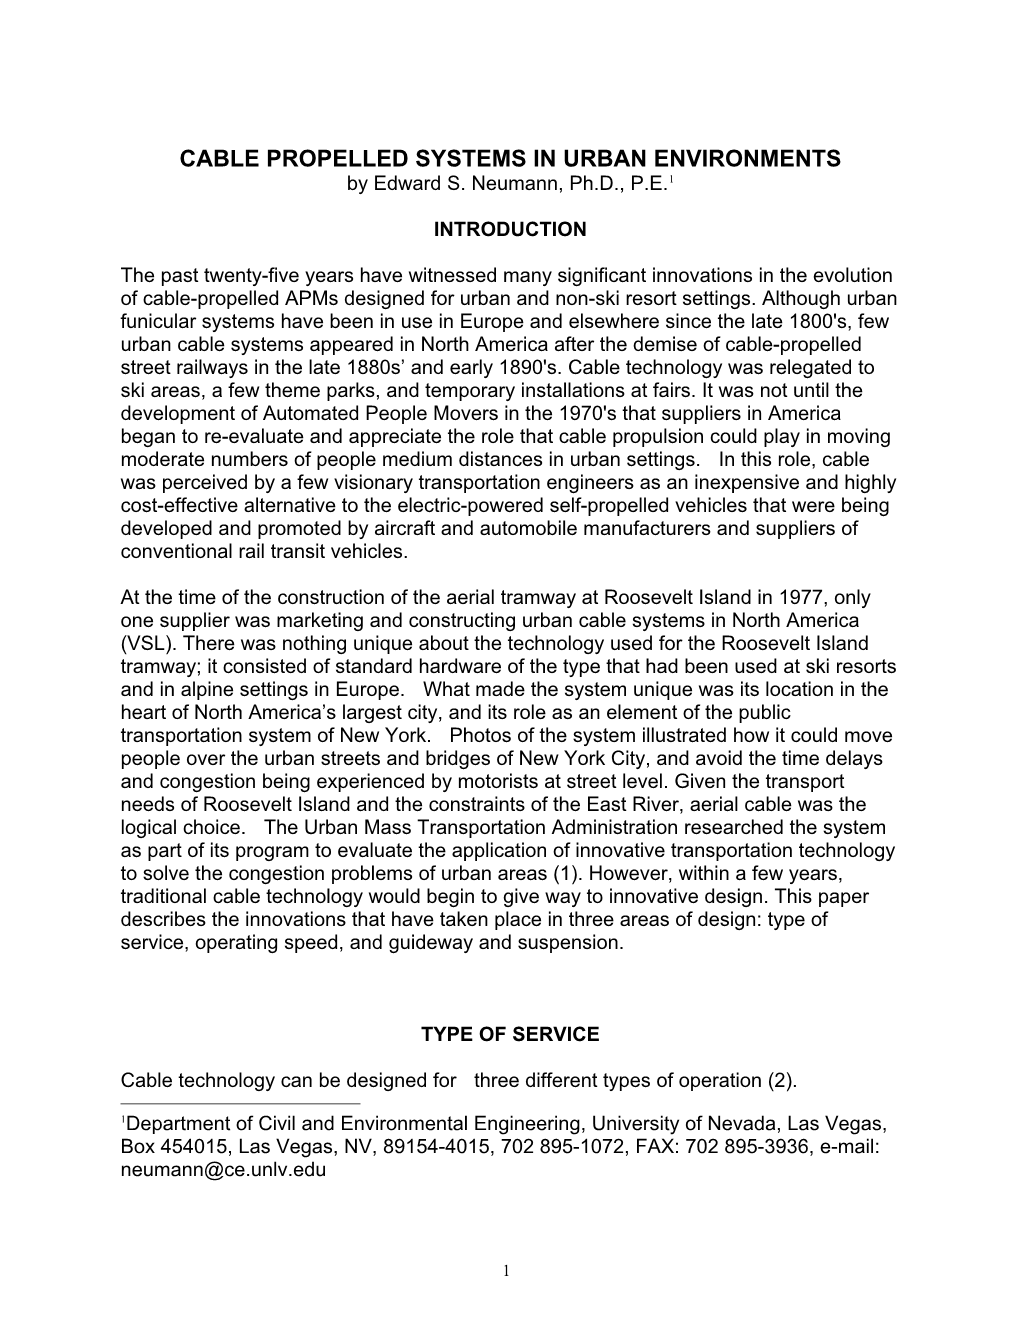 CABLE PROPELLED SYSTEMS in URBAN ENVIRONMENTS by Edward S